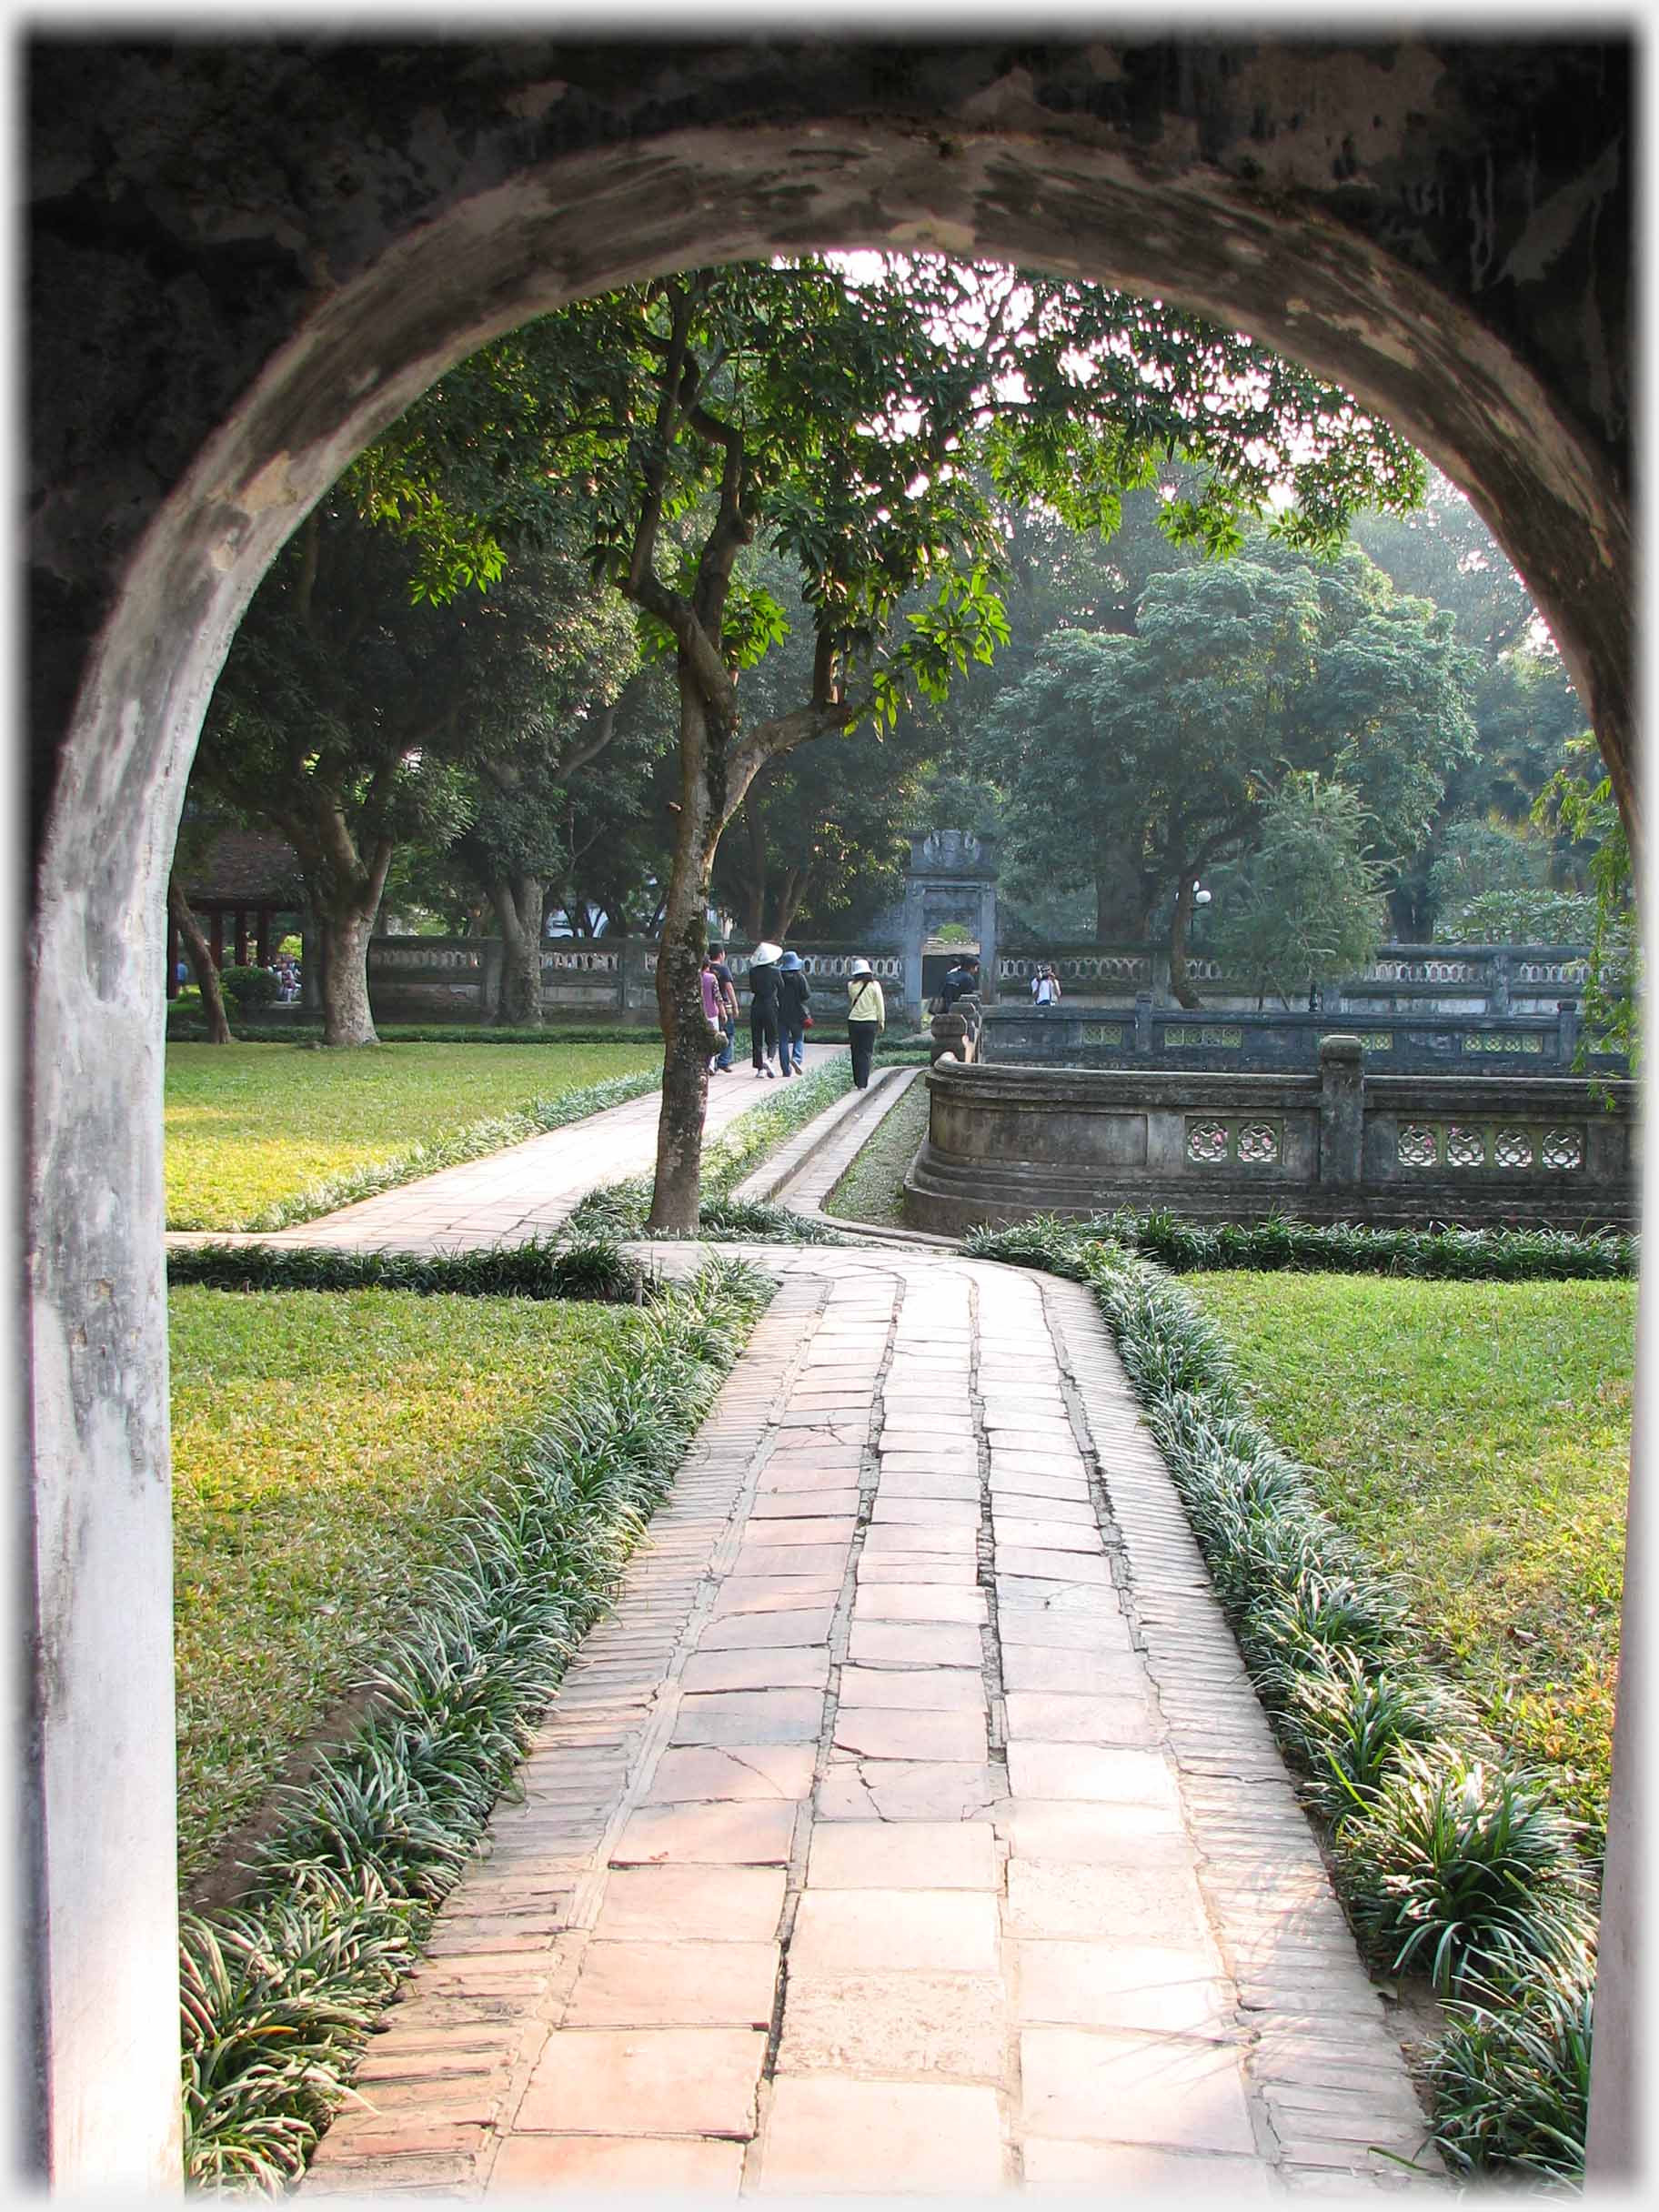 View through arch of pathway and grass.